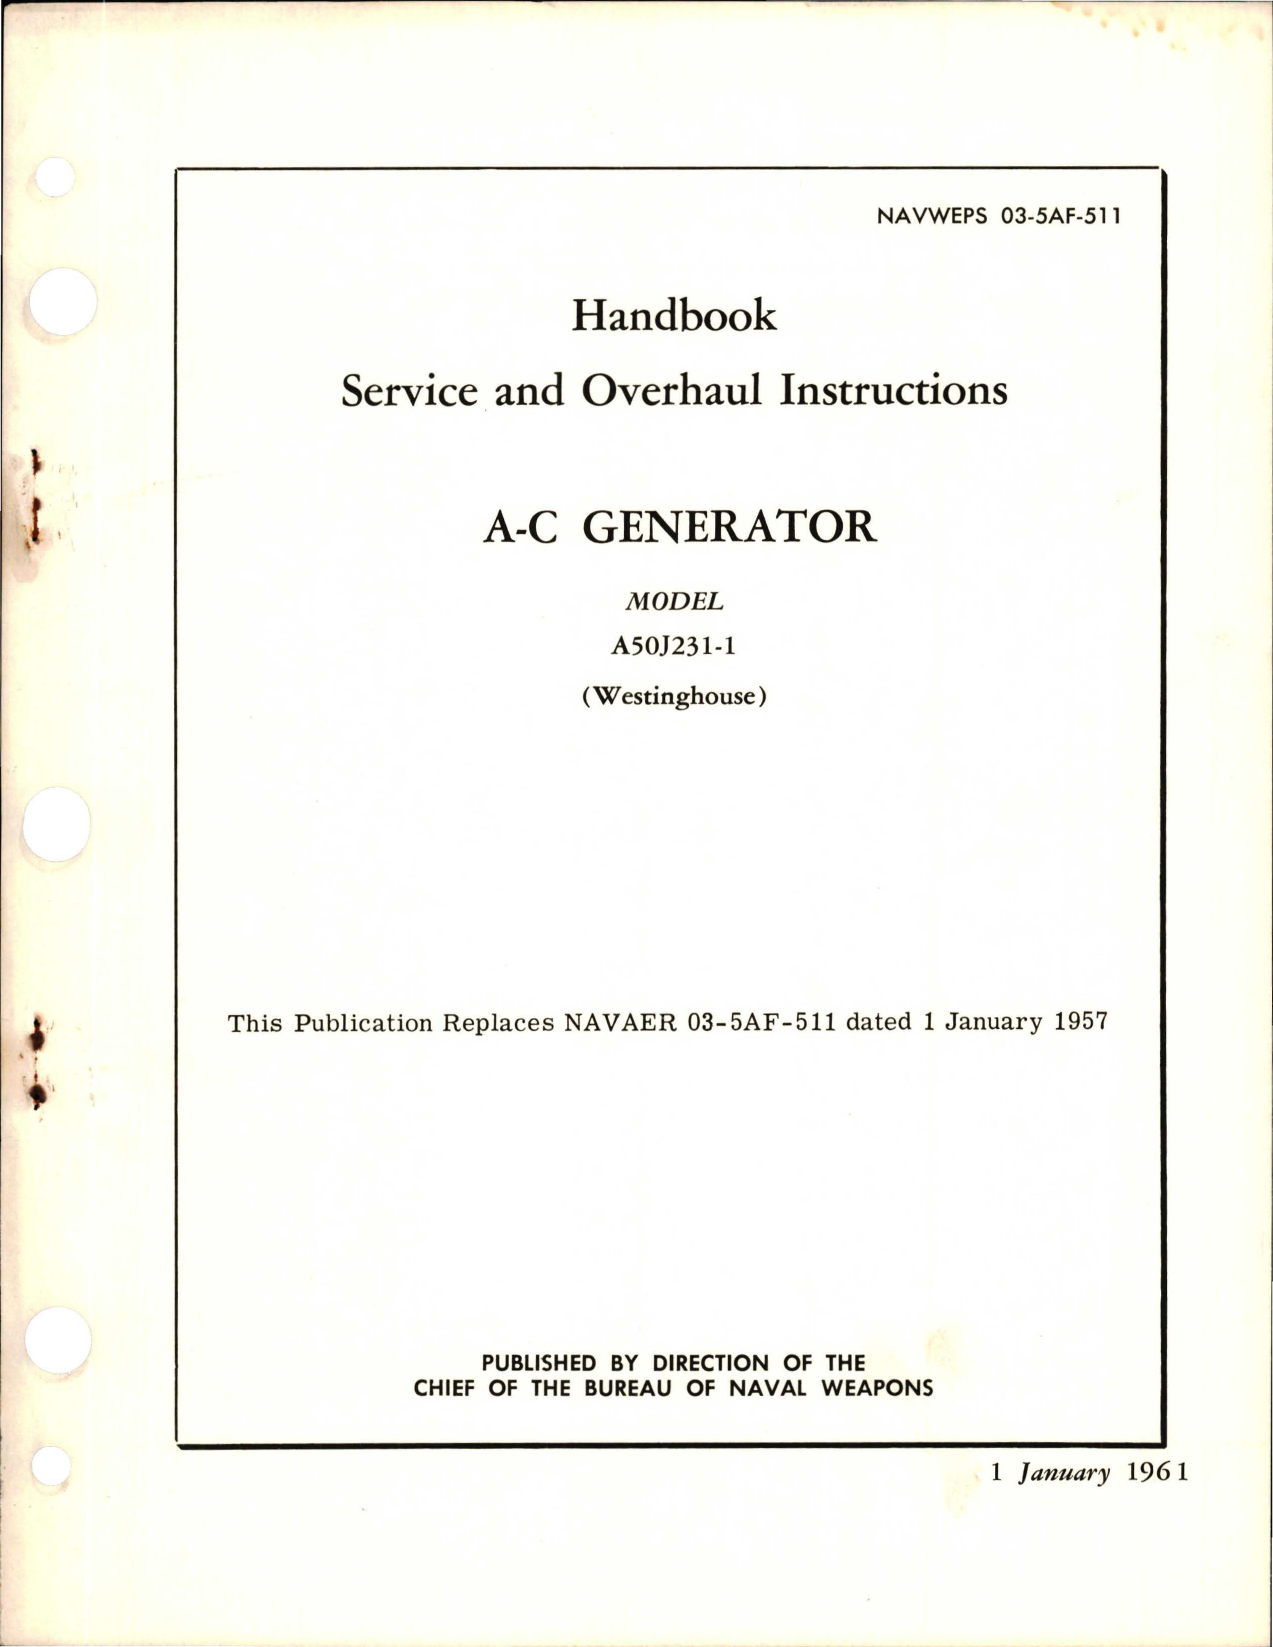 Sample page 1 from AirCorps Library document: Service and Overhaul Instructions for AC Generator - Model A50J231-1